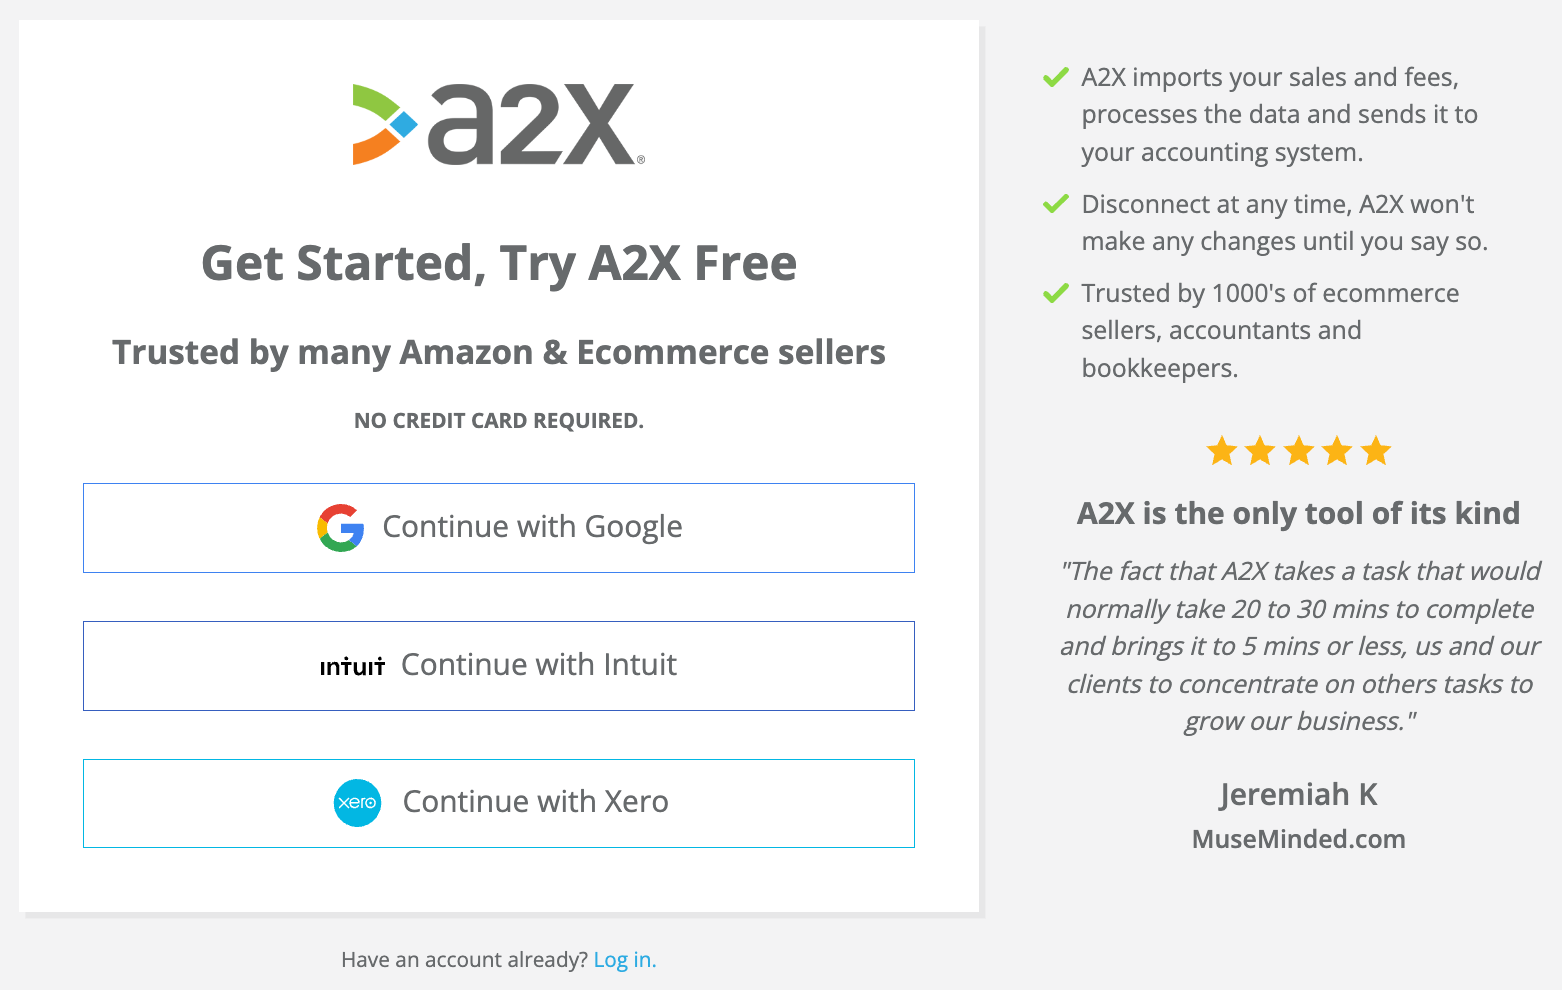 Screenshot of the A2X sign up page with options to log in via Google, Intuit, or Xero